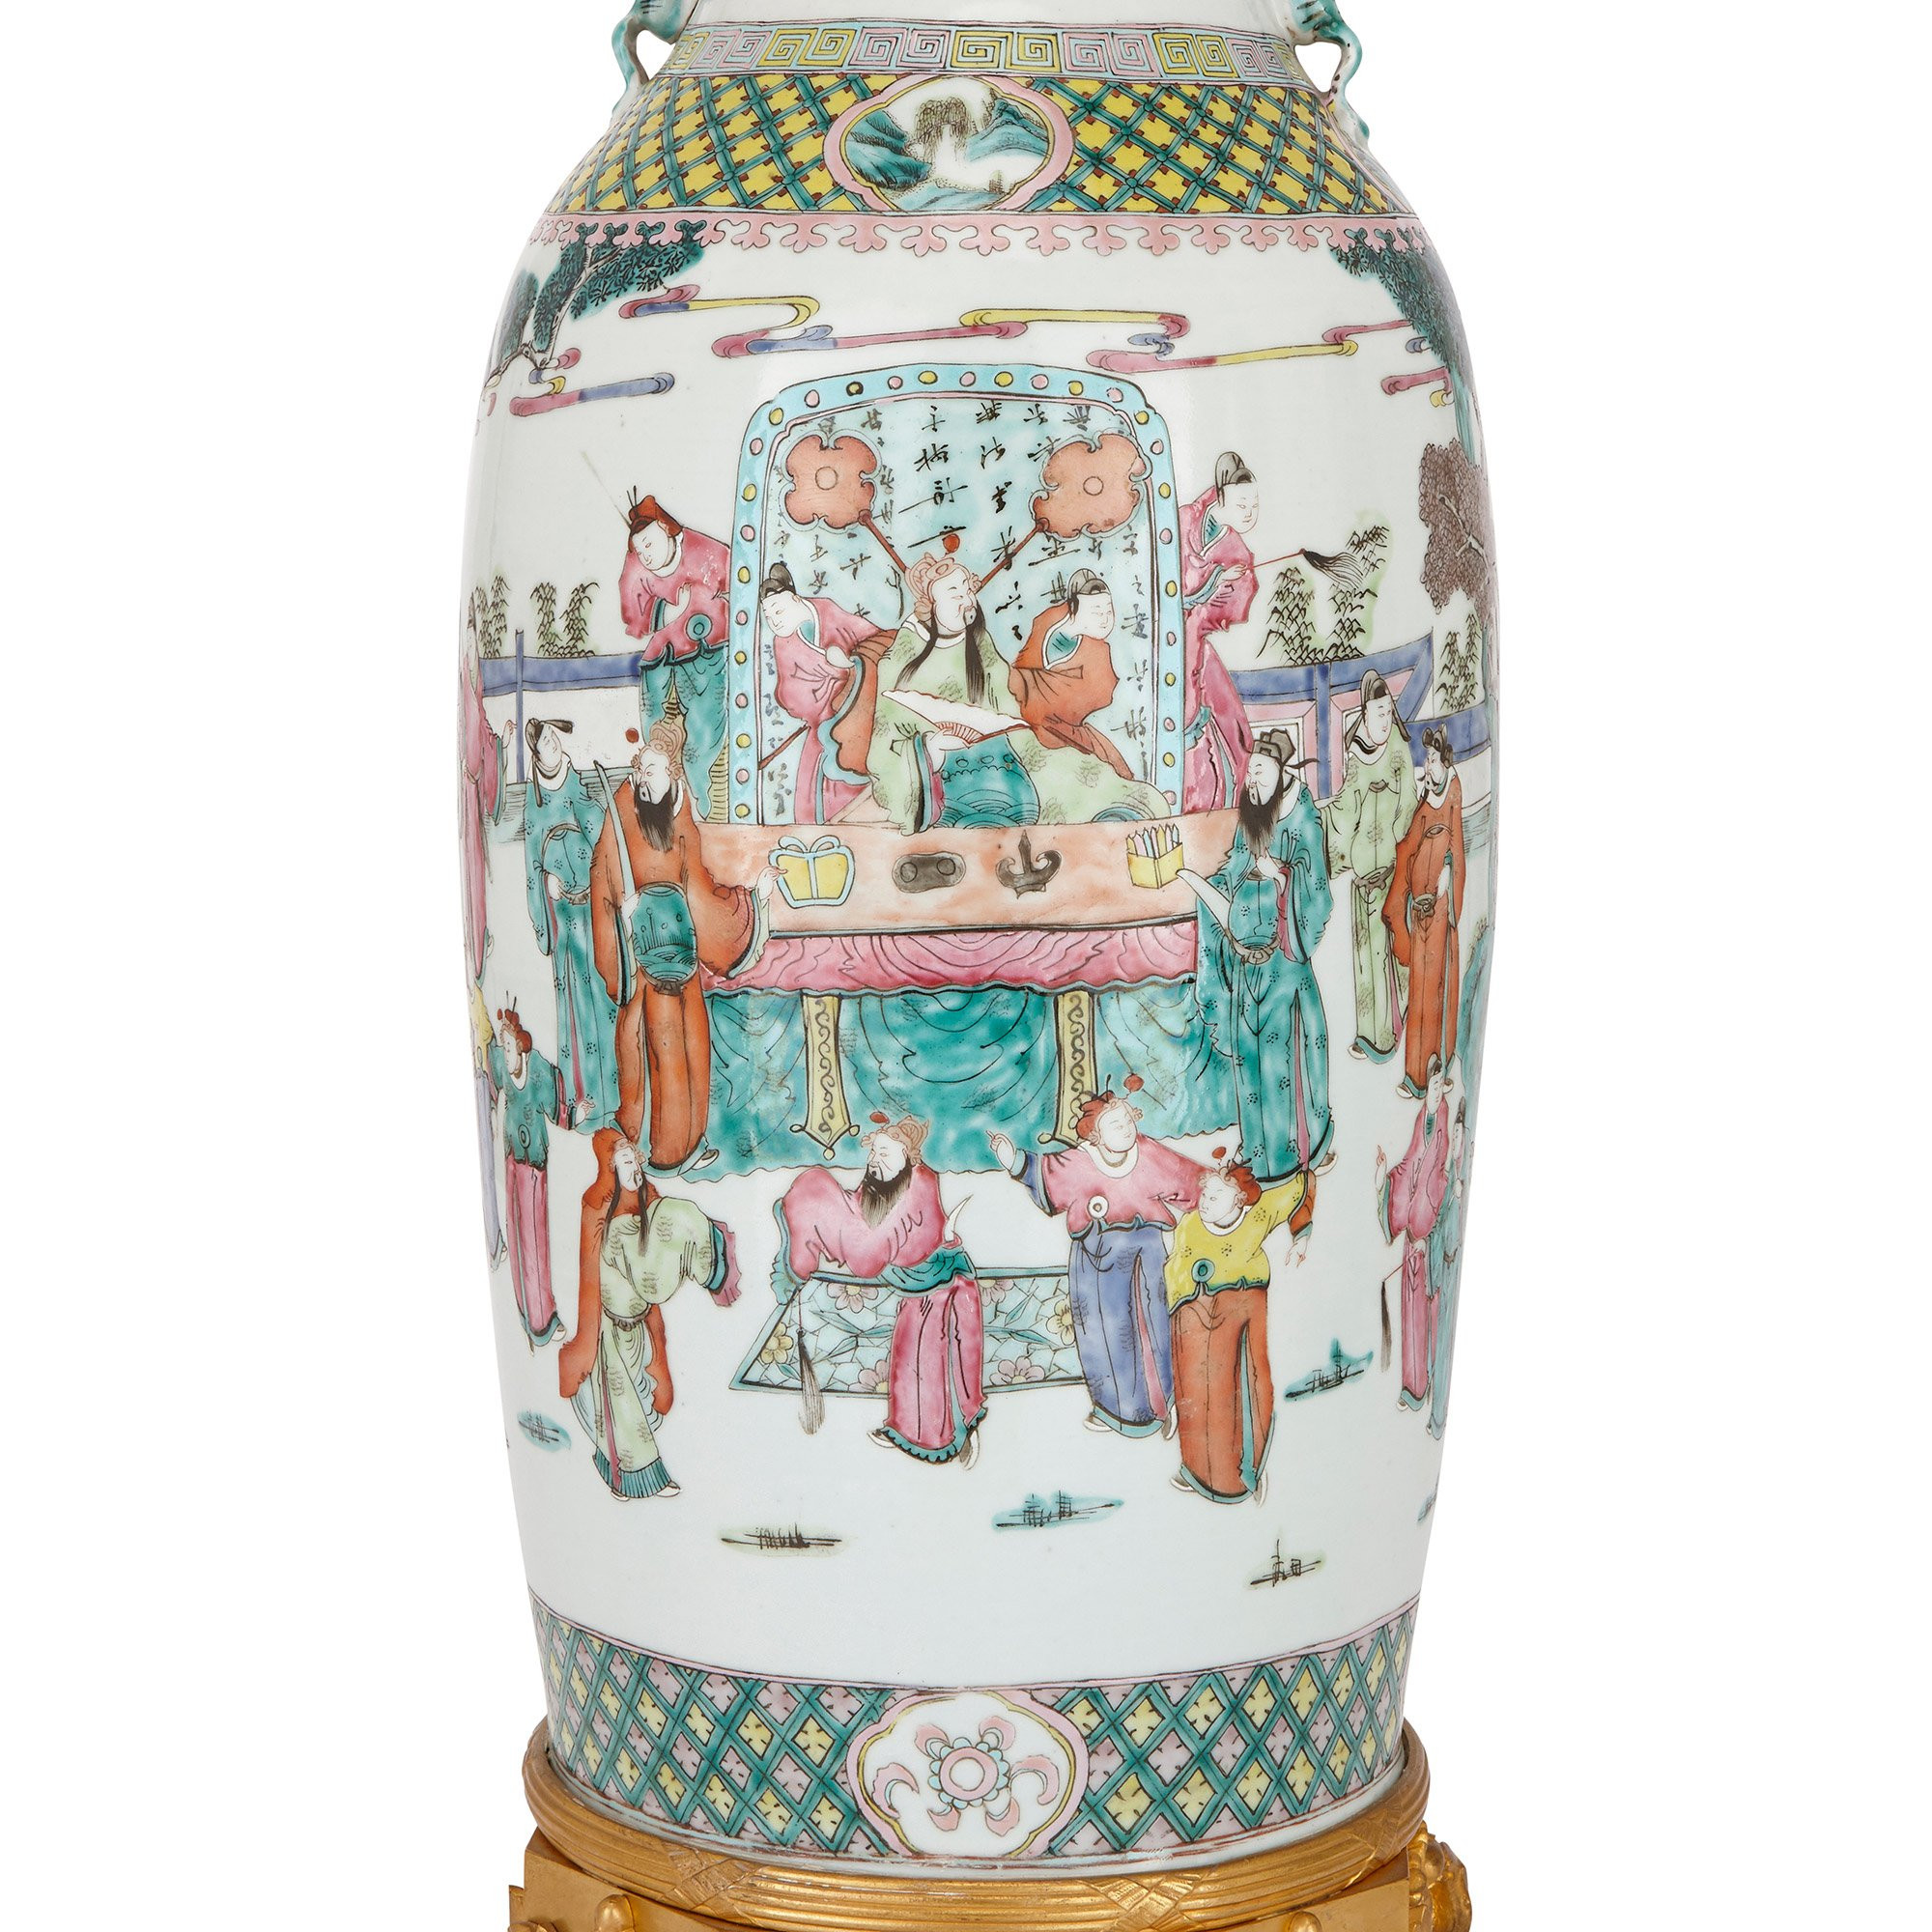 16 Perfect Antique Chinese Vases for Sale 2022 free download antique chinese vases for sale of pair of chinese antique canton famille rose porcelain vases for sale in pair of chinese antique canton famille rose porcelain vases for sale at 1stdibs